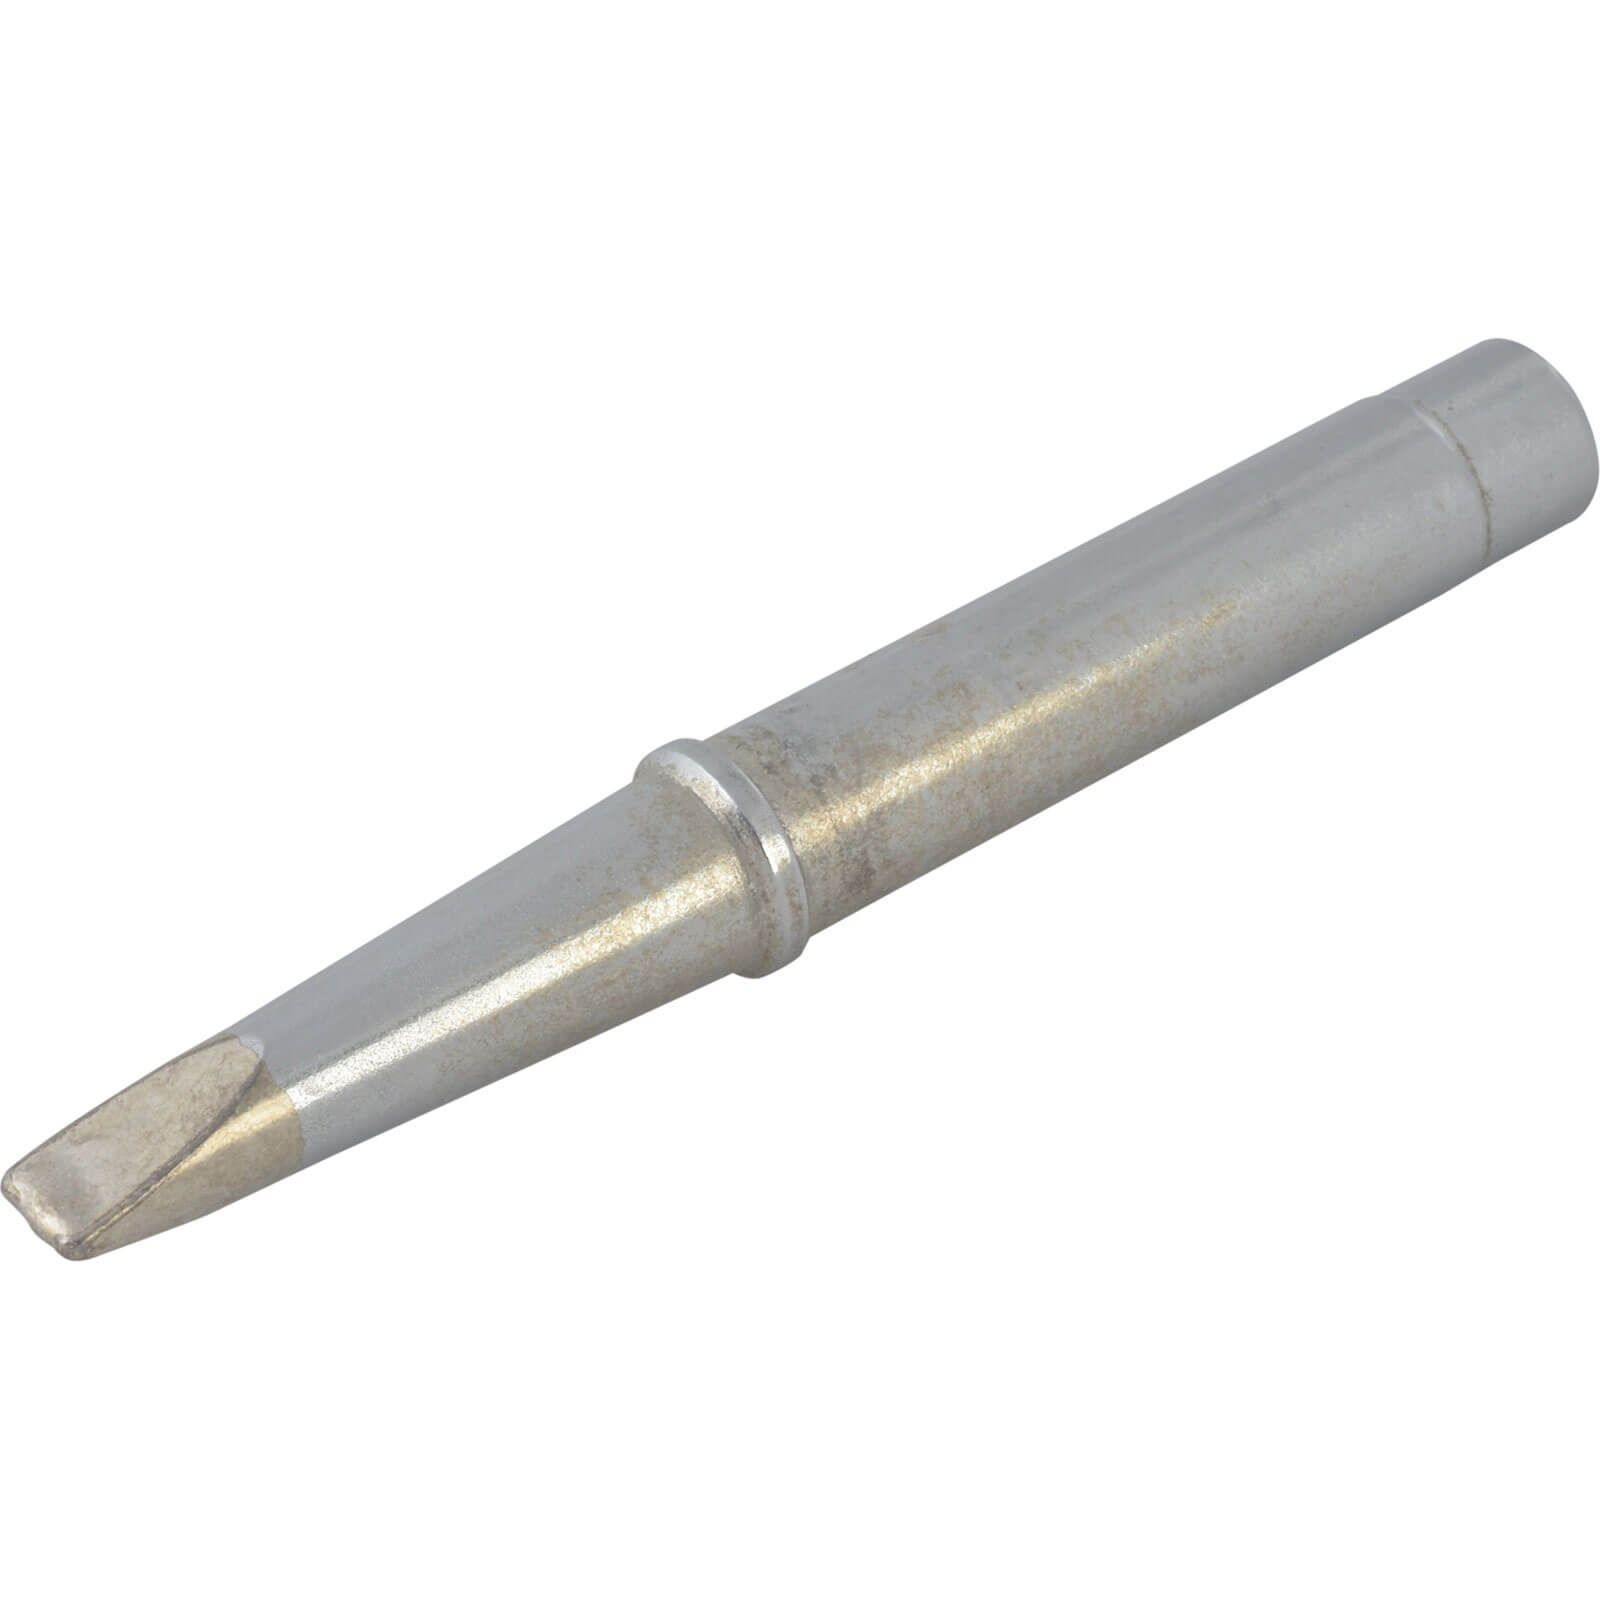 Photo of Weller Chisel Tip For W201 Soldering Iron